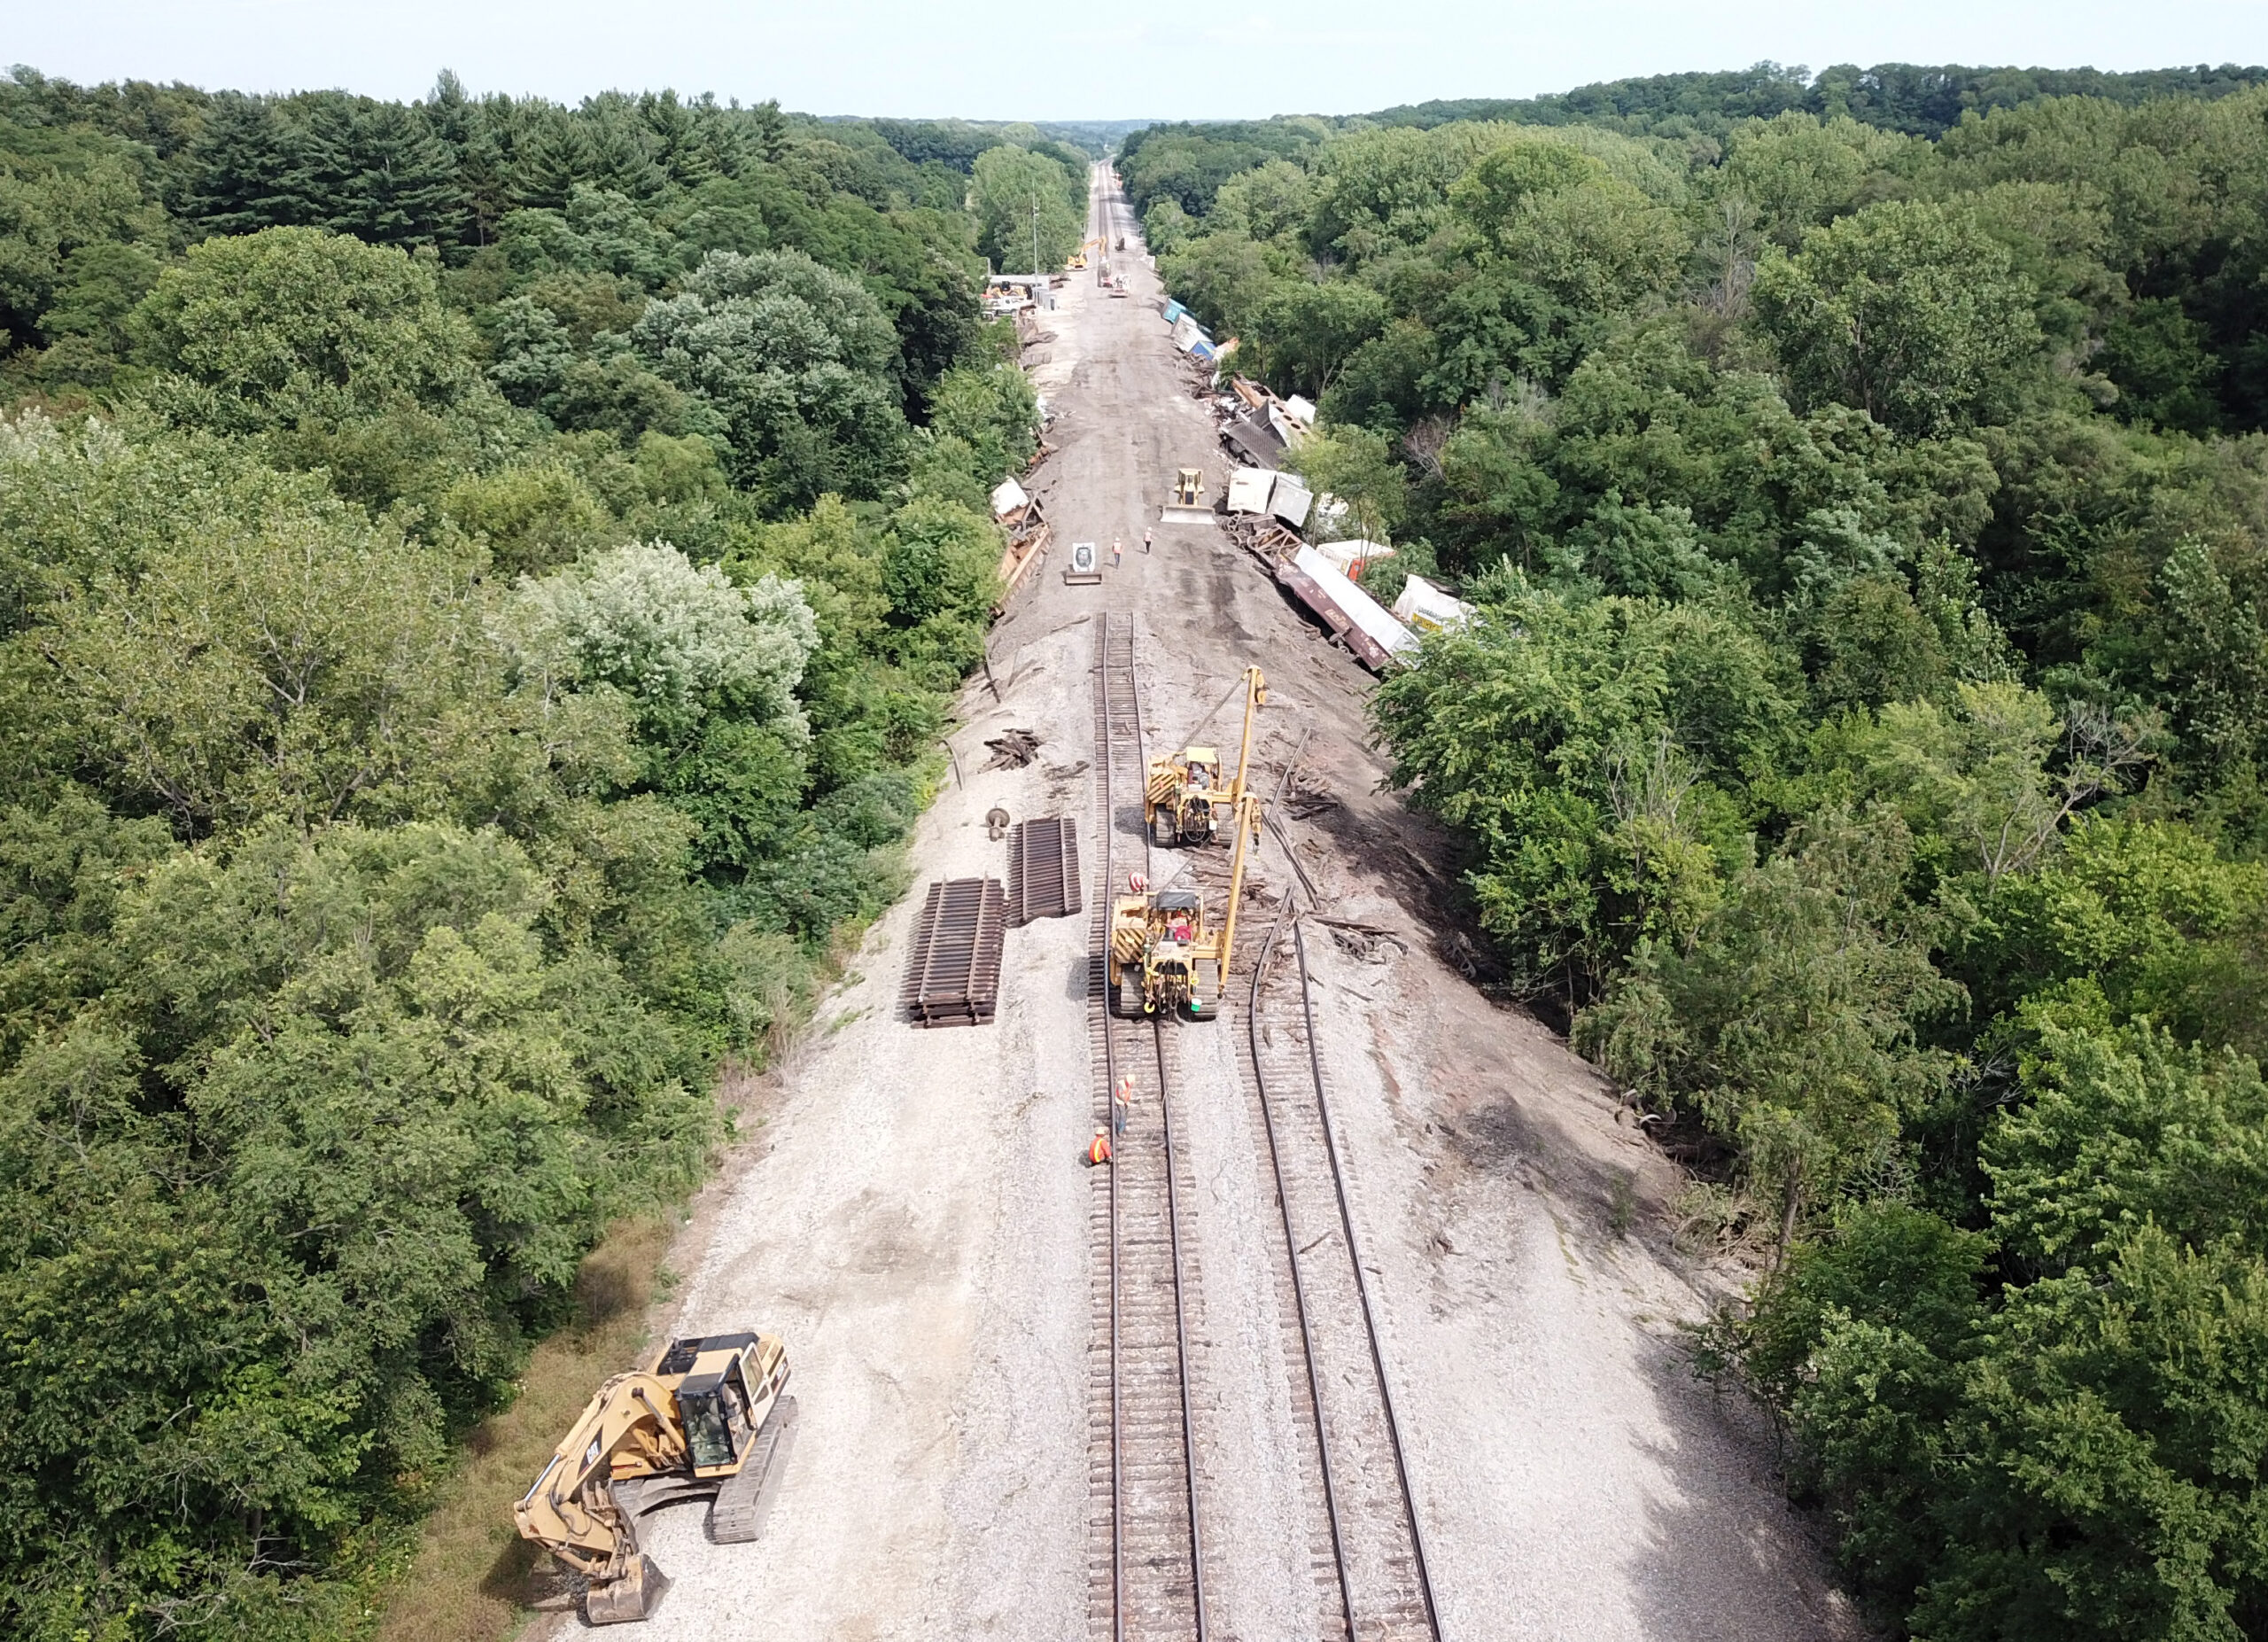 Heavy equipment working on railroad tracks with derailed cars off to one side